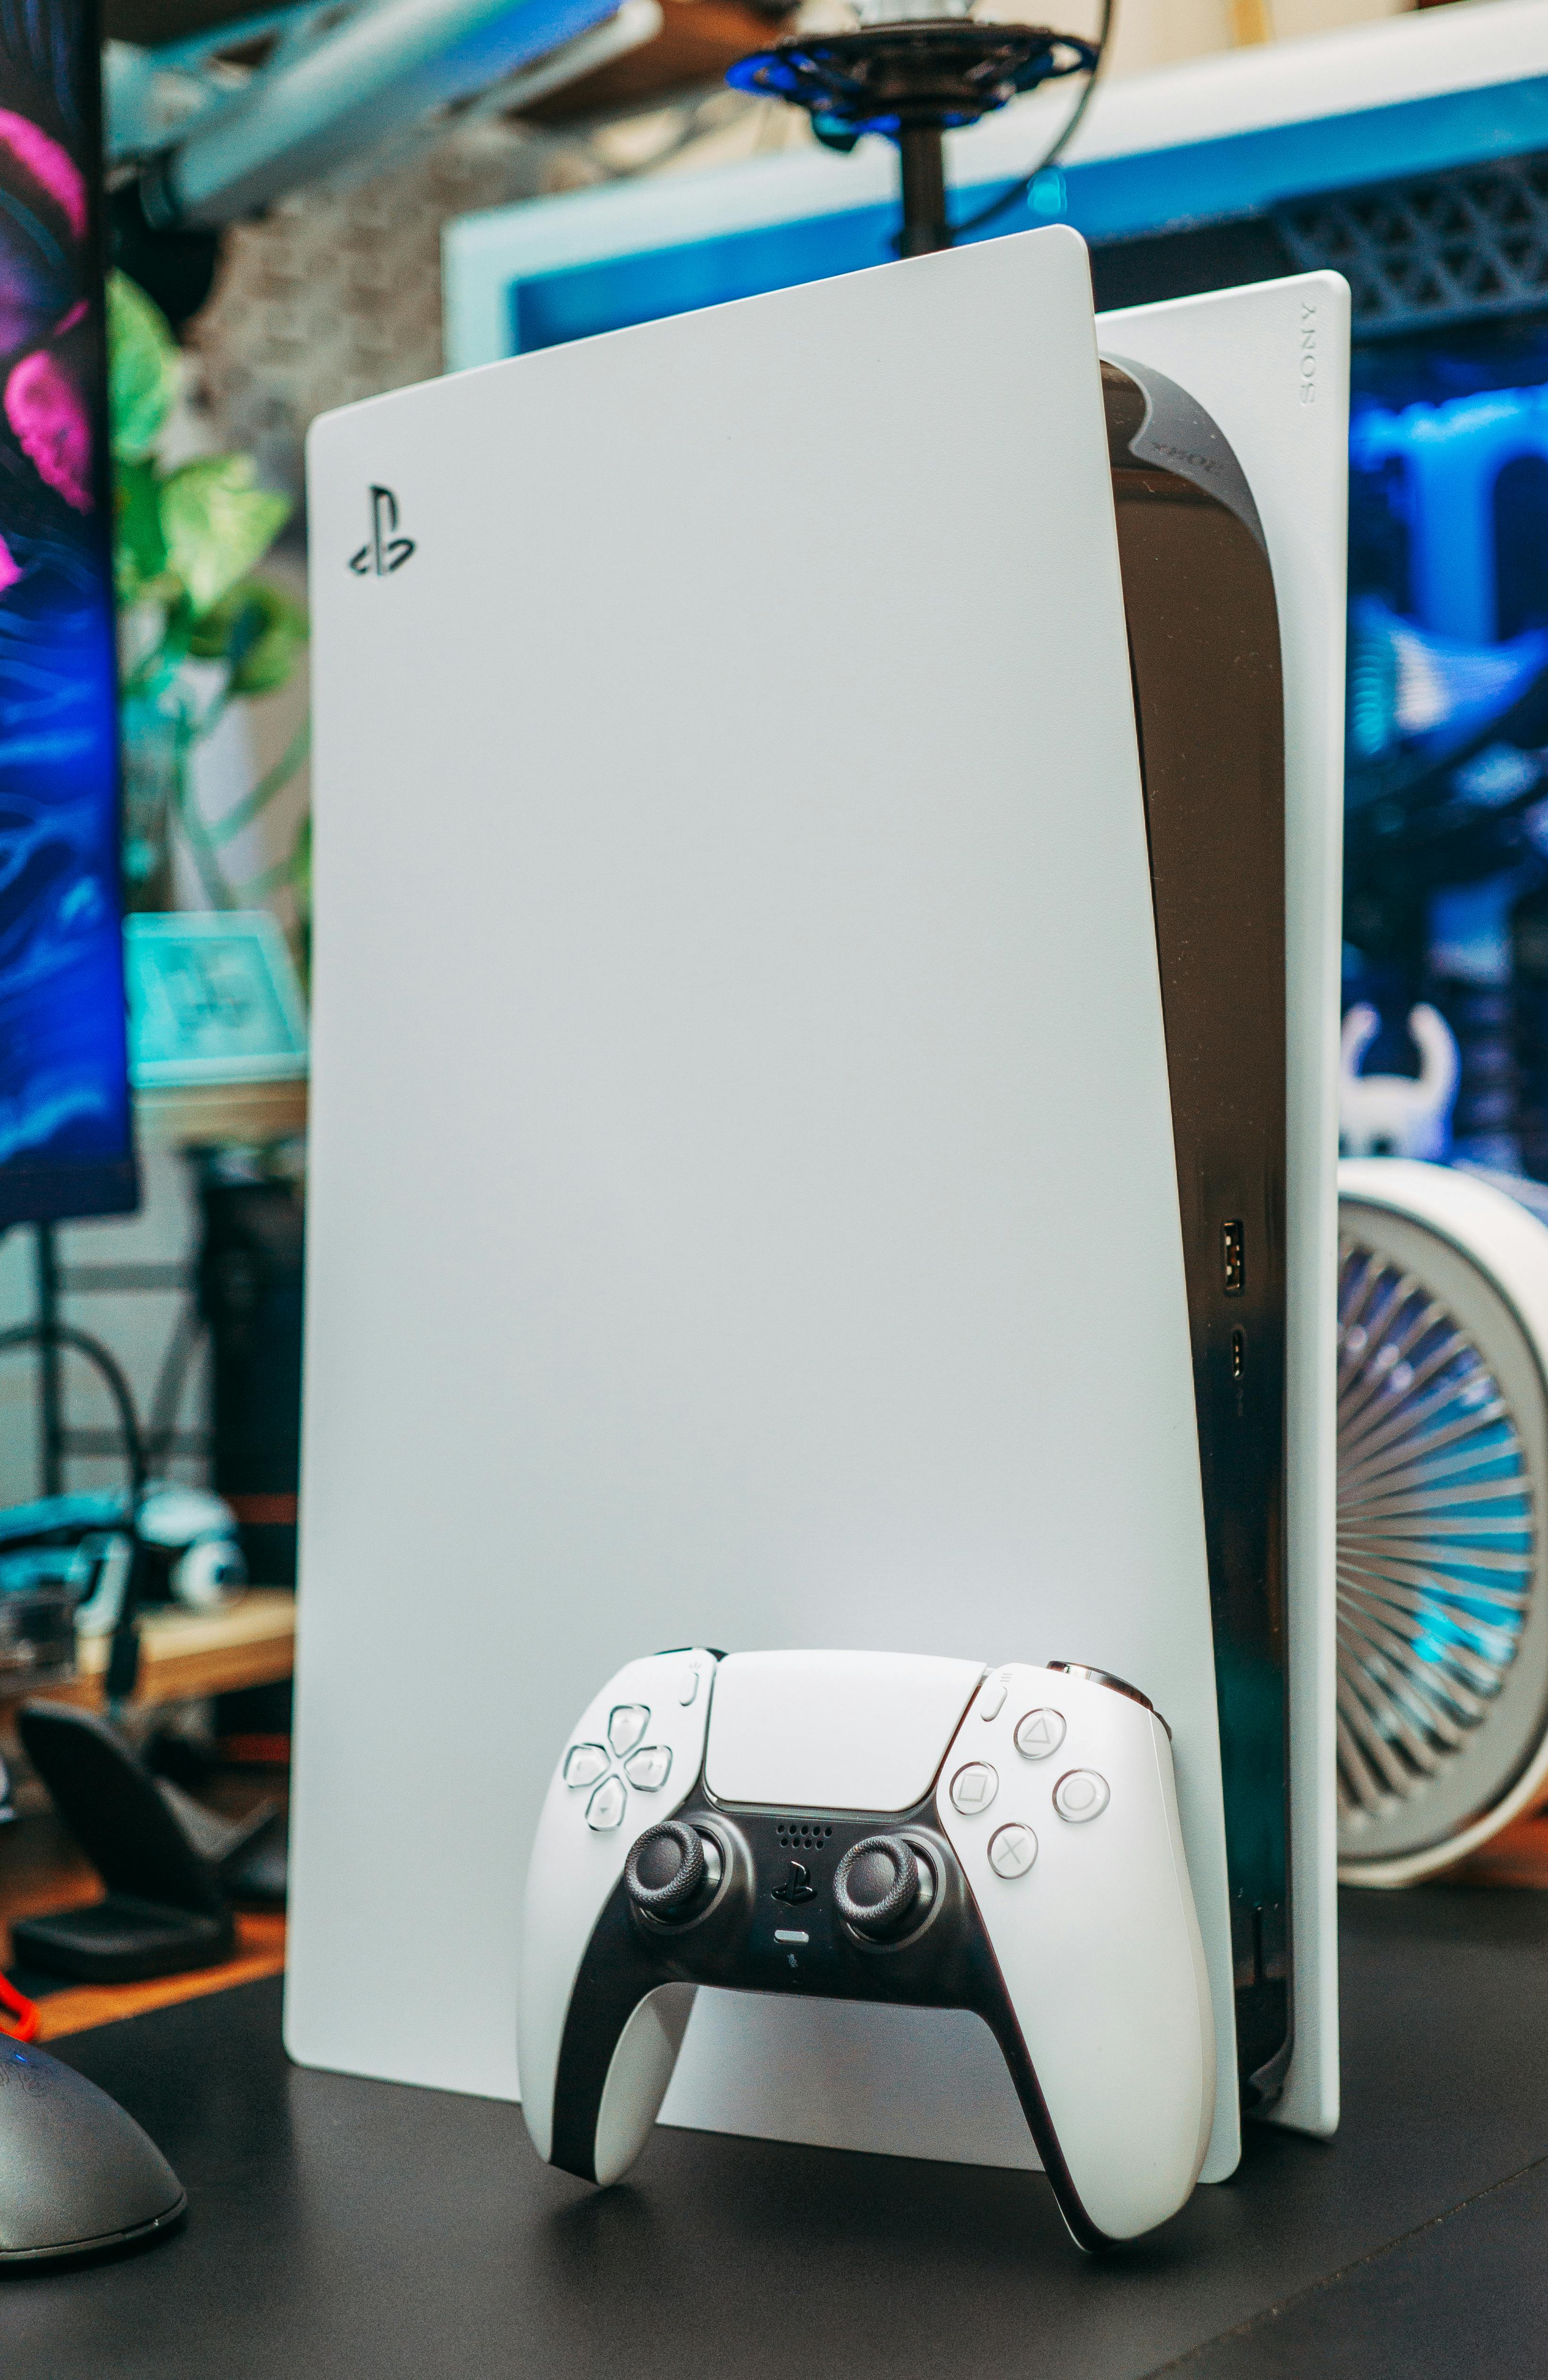 A PlayStation console and controller | Source: Pexels